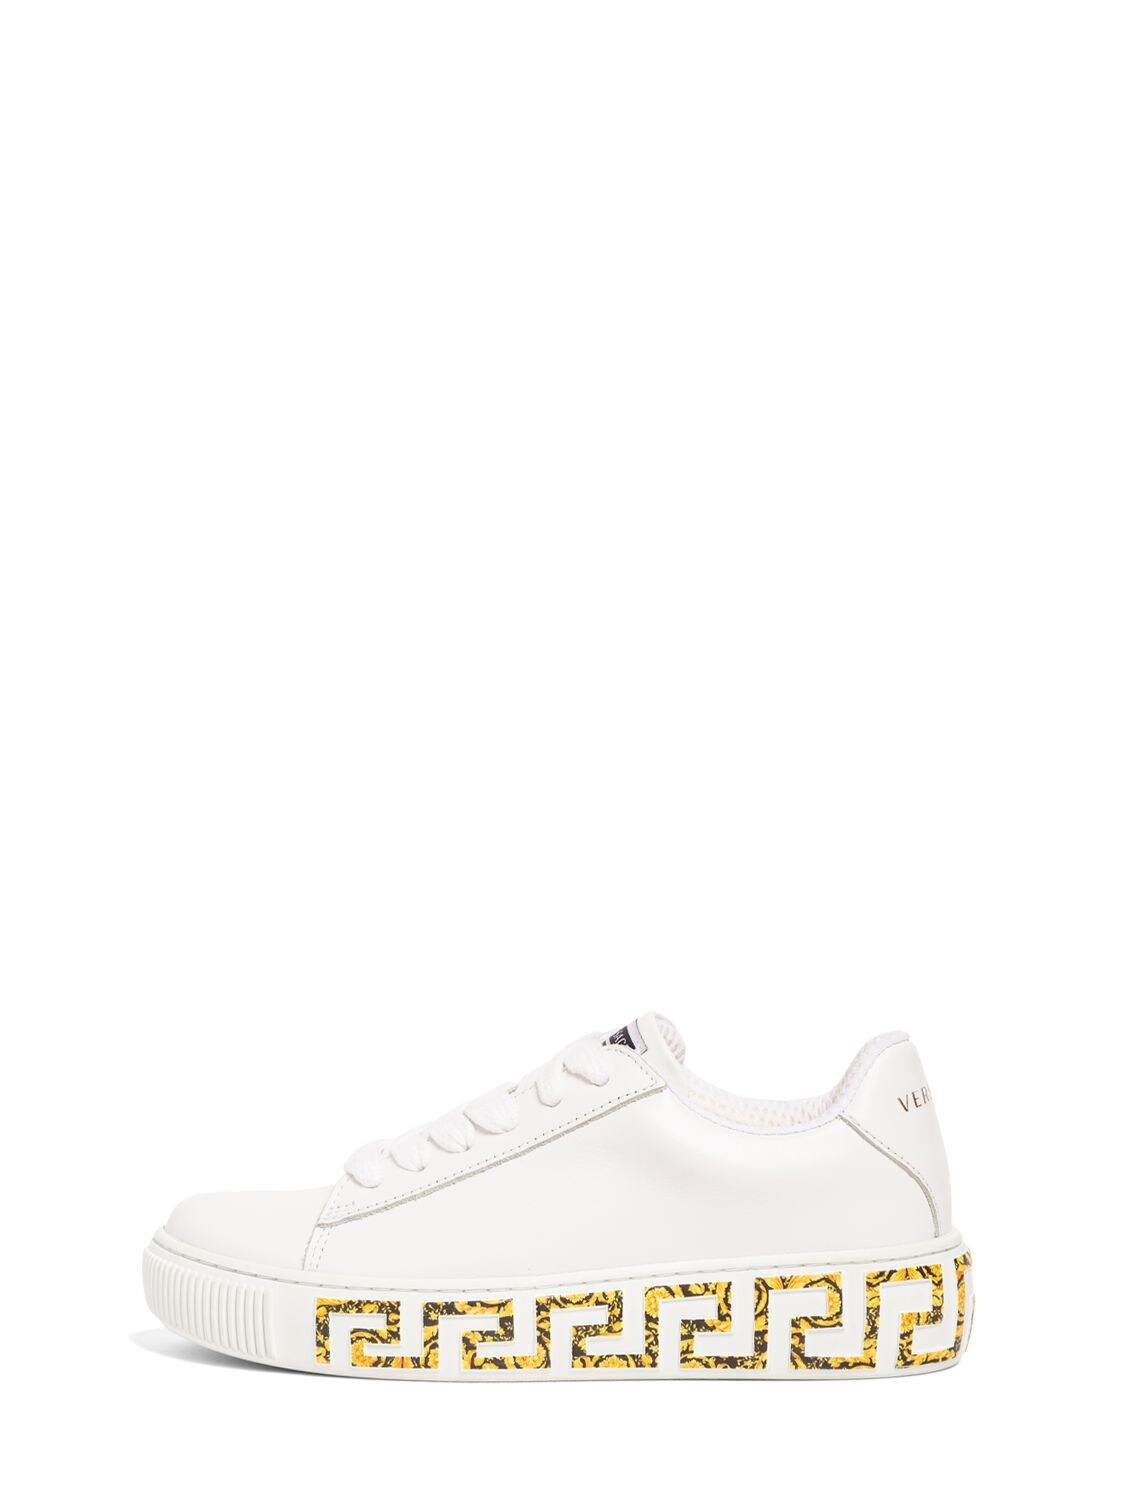 VERSACE PRINTED LEATHER LACE-UP SNEAKERS